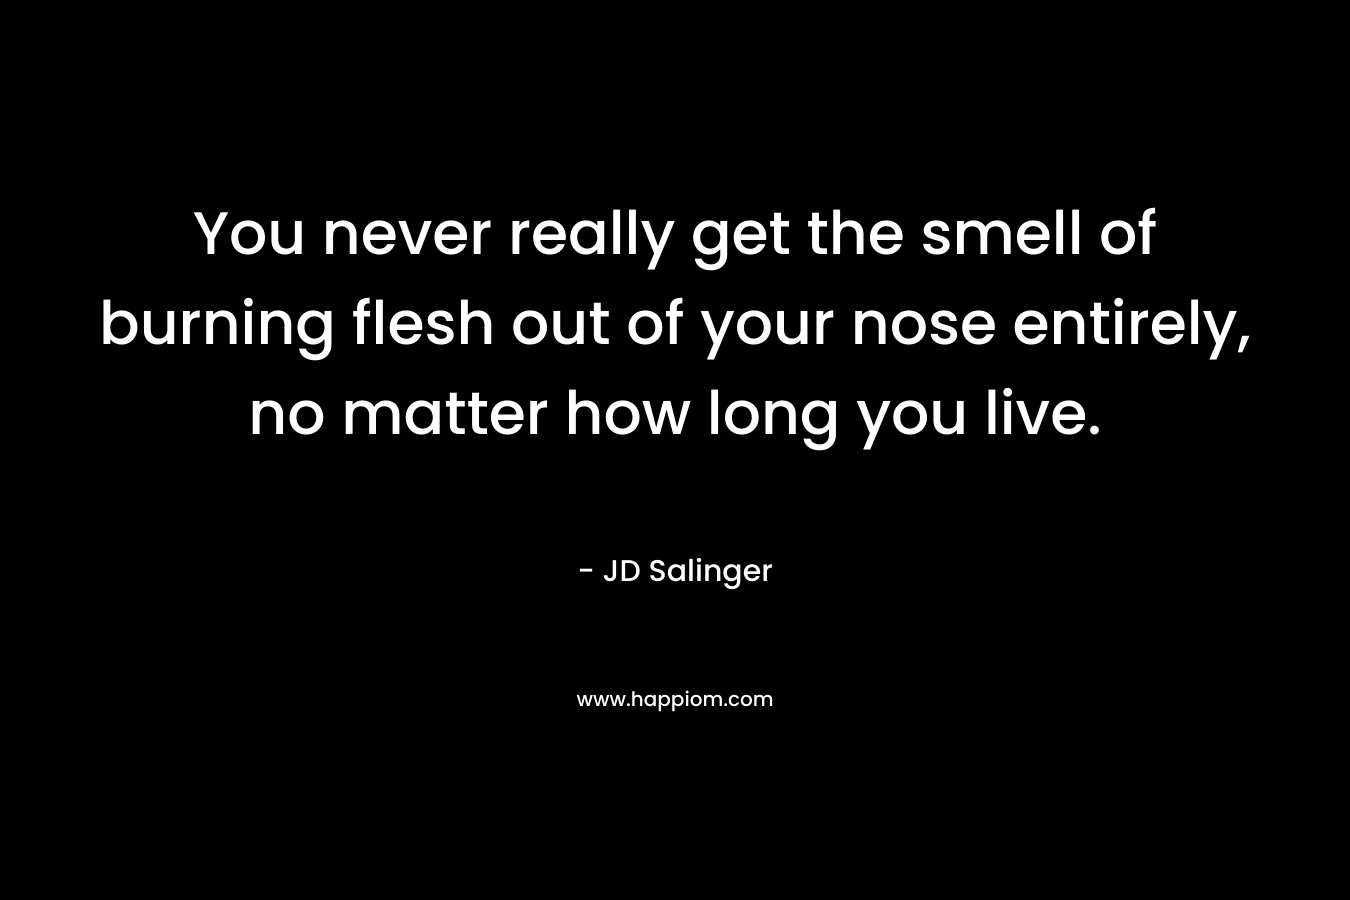 You never really get the smell of burning flesh out of your nose entirely, no matter how long you live.